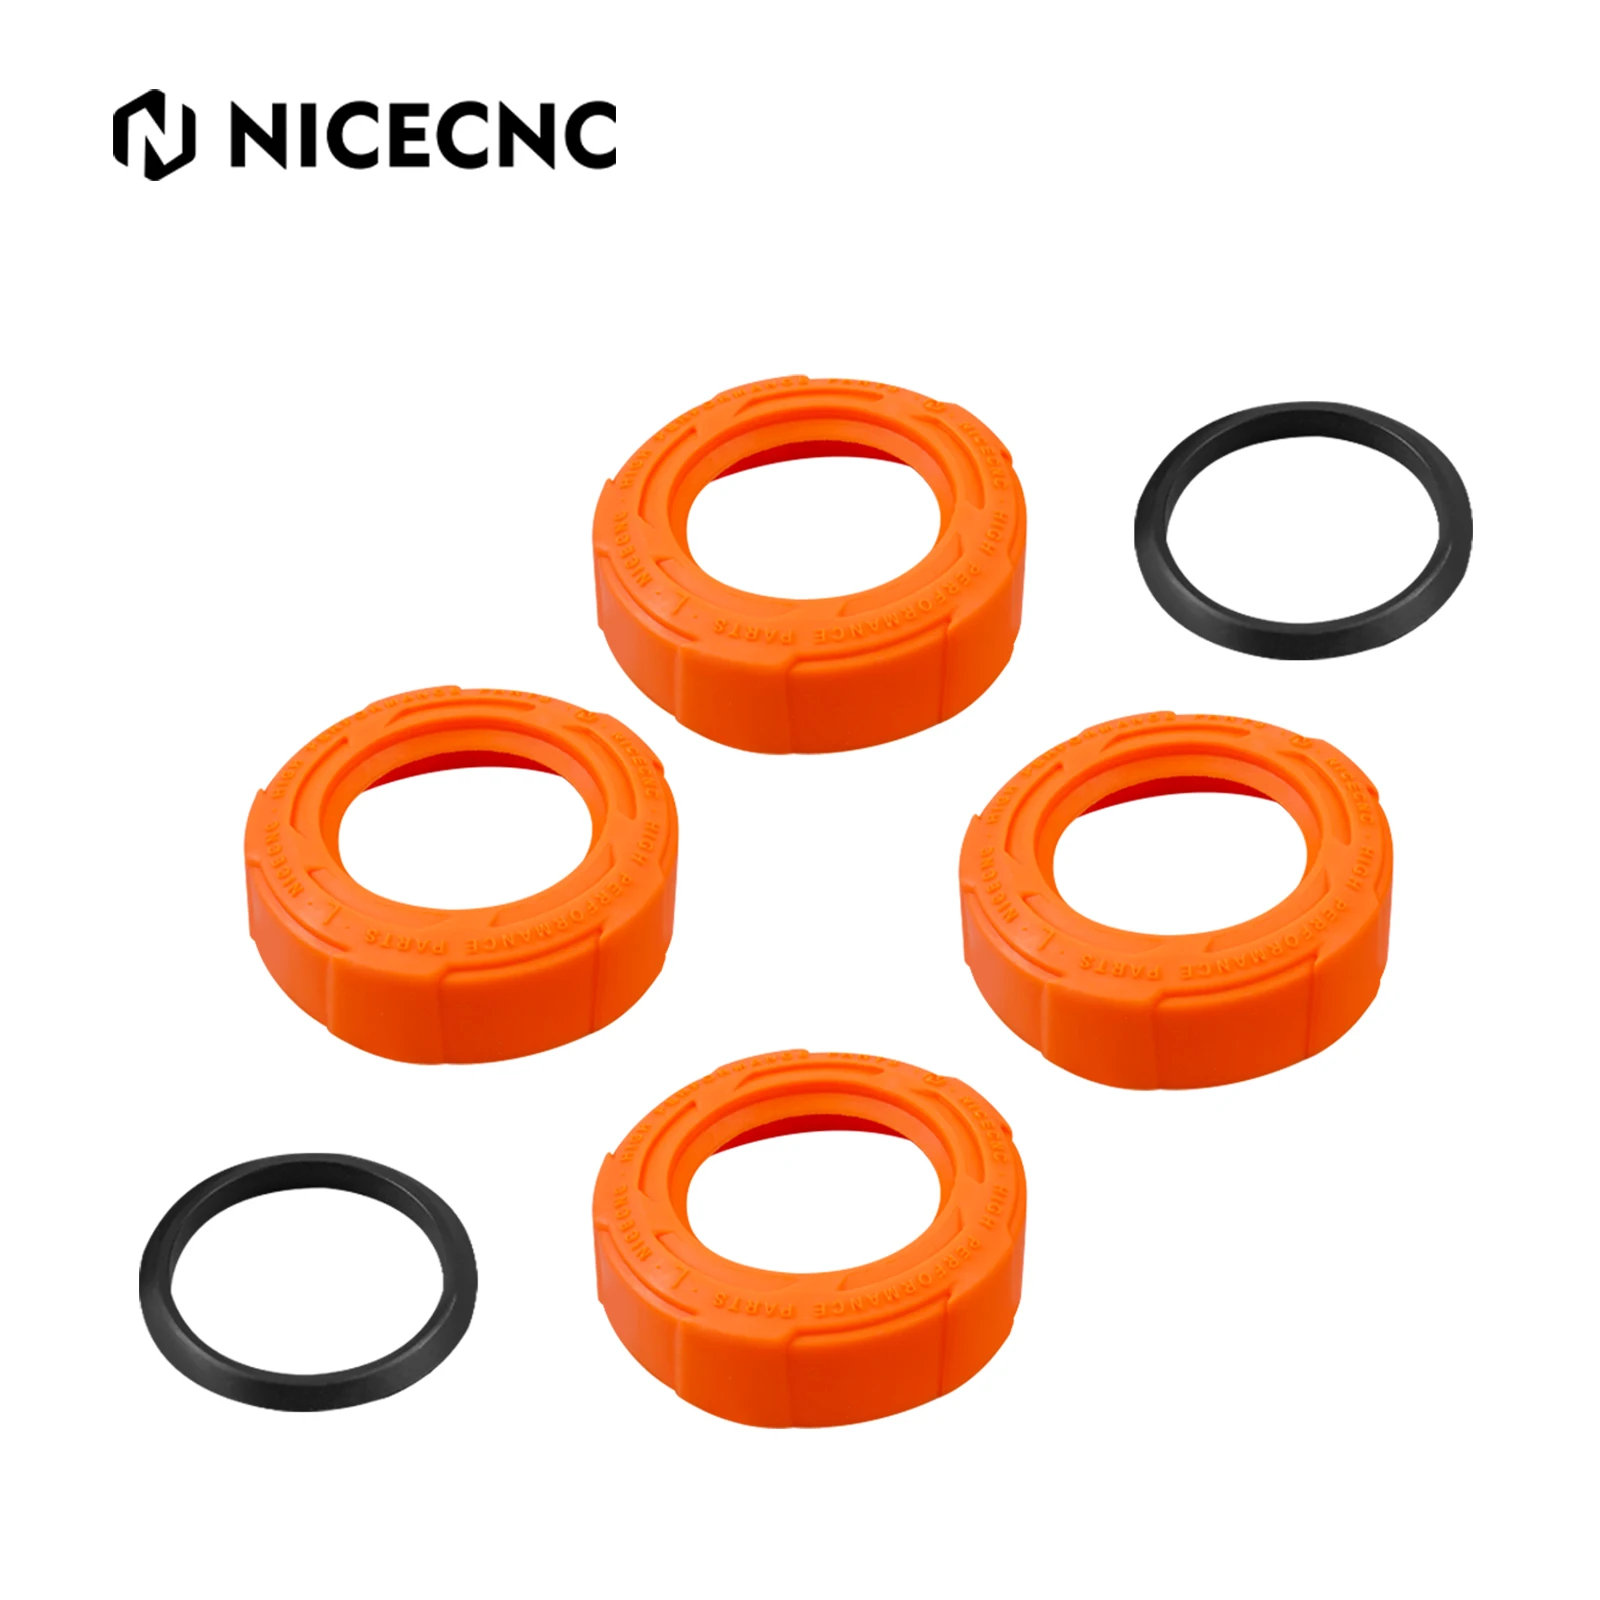 

NICECNC Front Rear Wheel Bearing Protection Cap Guard For KTM 125 200 250 300 350 400 450 500 EXC EXCF EXCW XCW XC XCF SX SXF